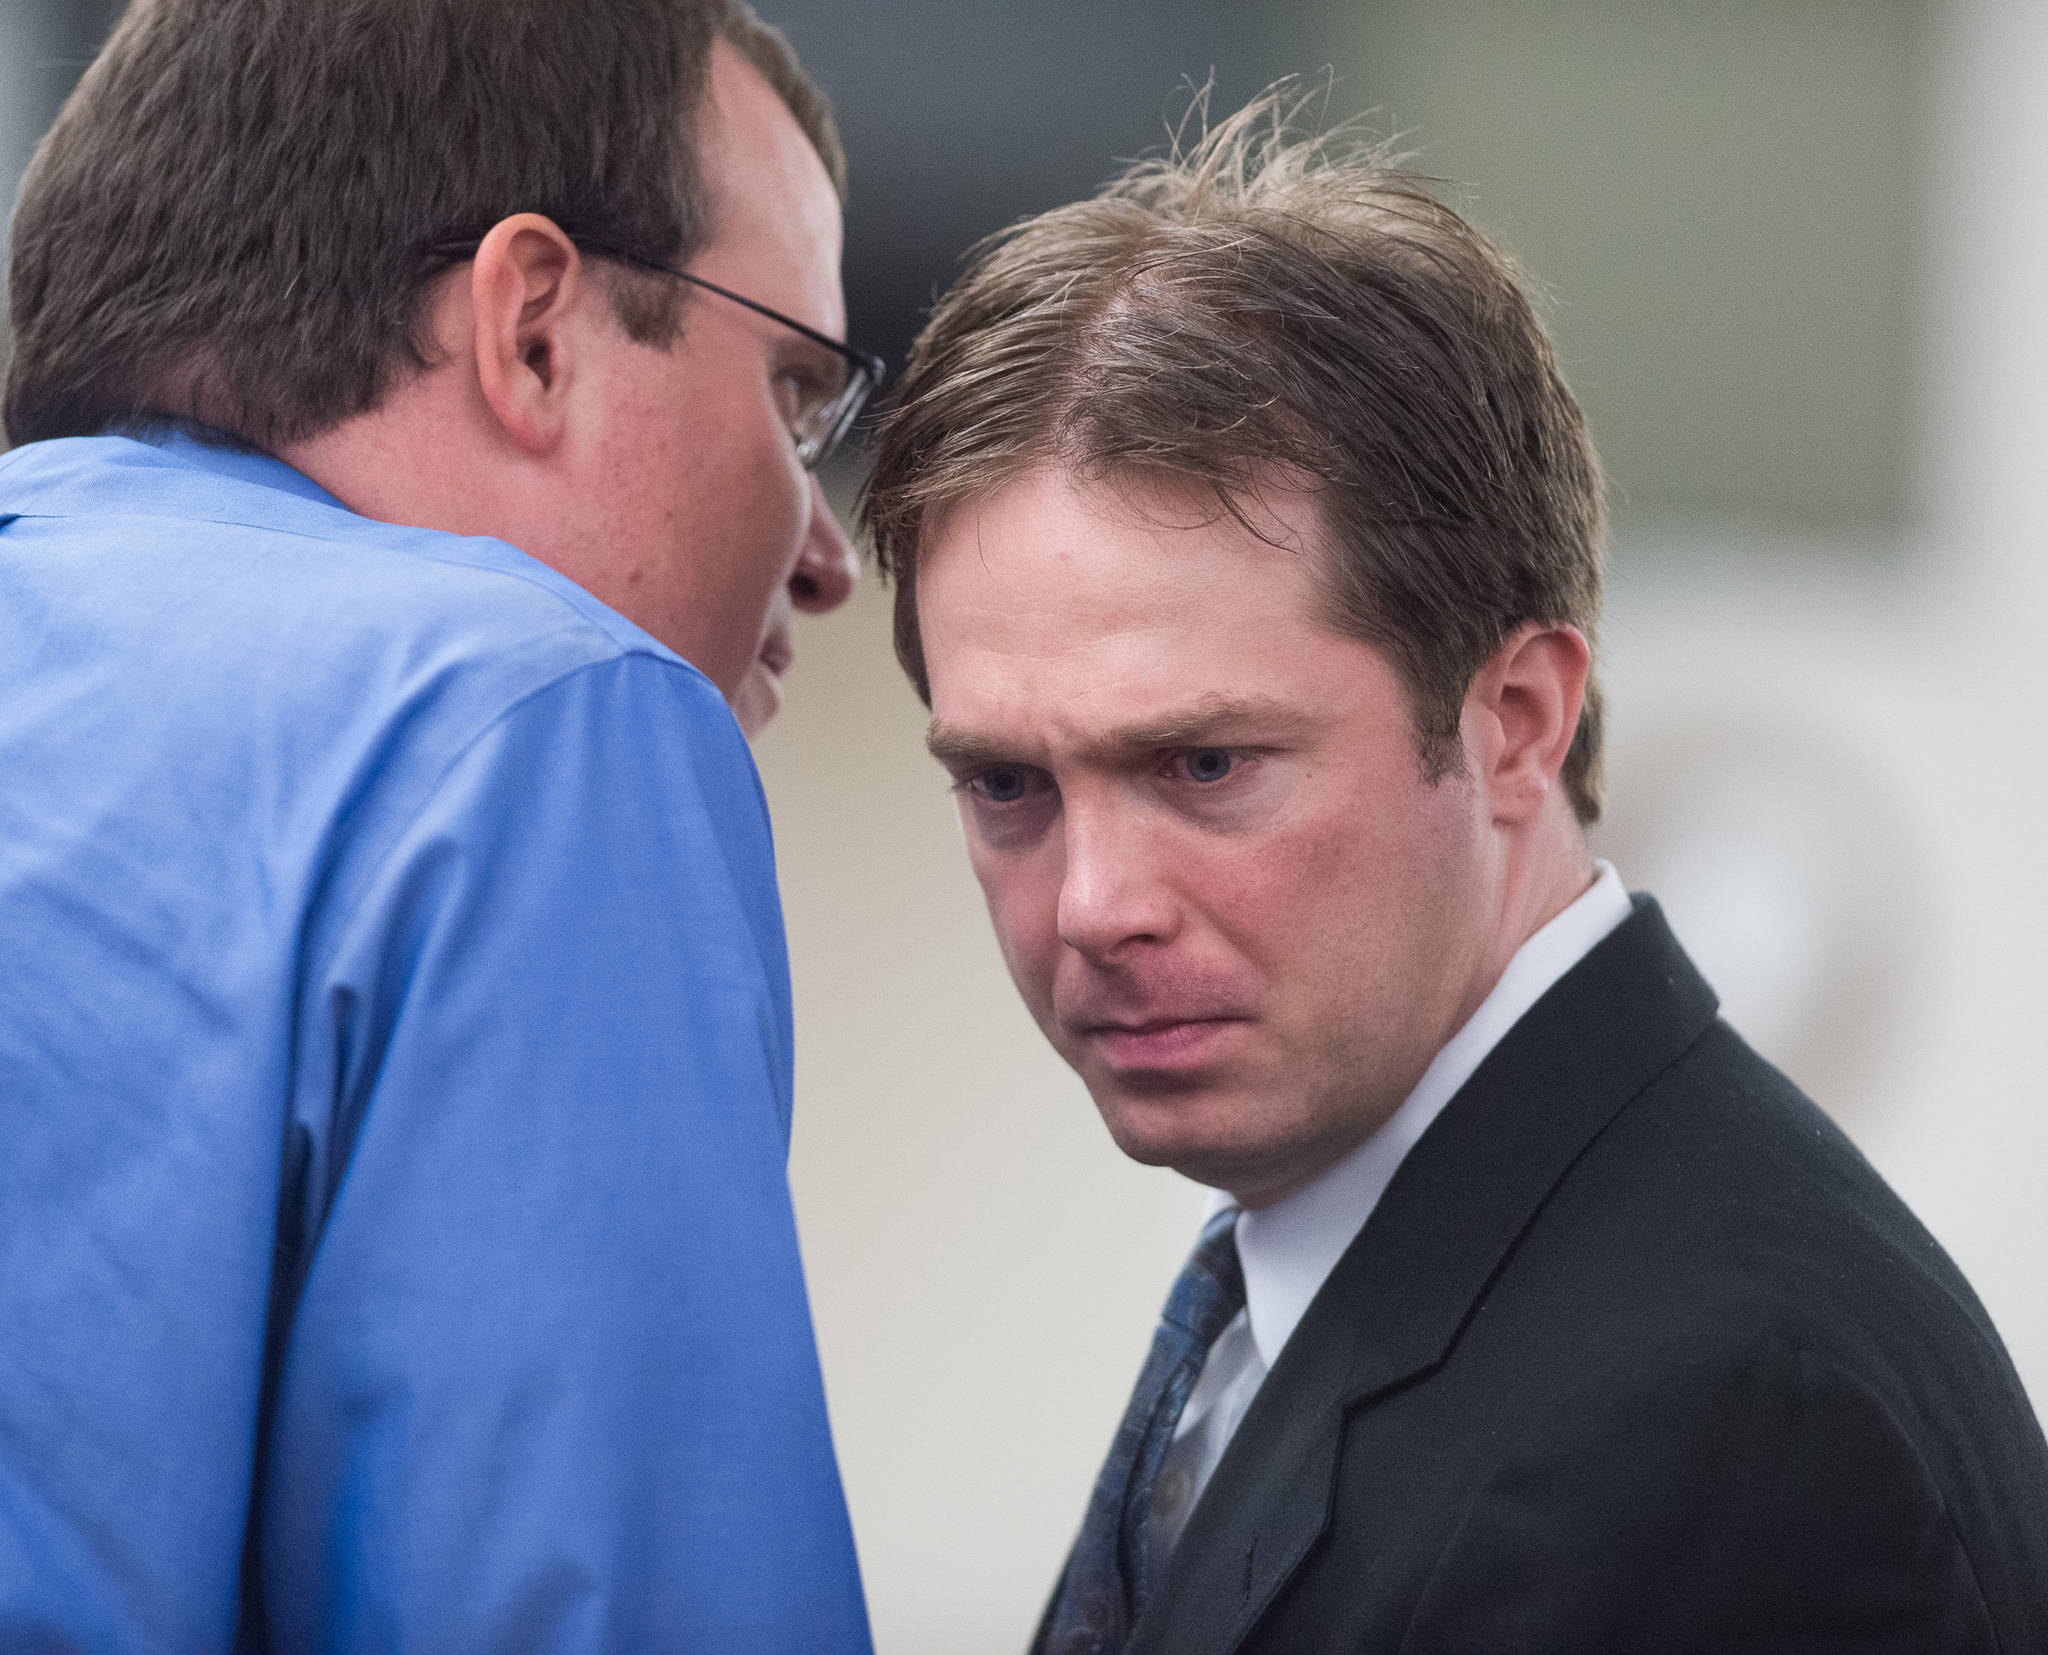 Christopher Strawn, right, confers with criminal defense attorney Nicholas Polasky during his trial in Juneau Superior Court on Monday, Oct. 9, 2017. Strawn, 34, faces charges of first-degree and second-degree murder, manslaughter, criminally negligent homicide, third-degree assault and weapons misconduct in the shooting death of Brandon Cook in October 2015. (Michael Penn | Juneau Empire)